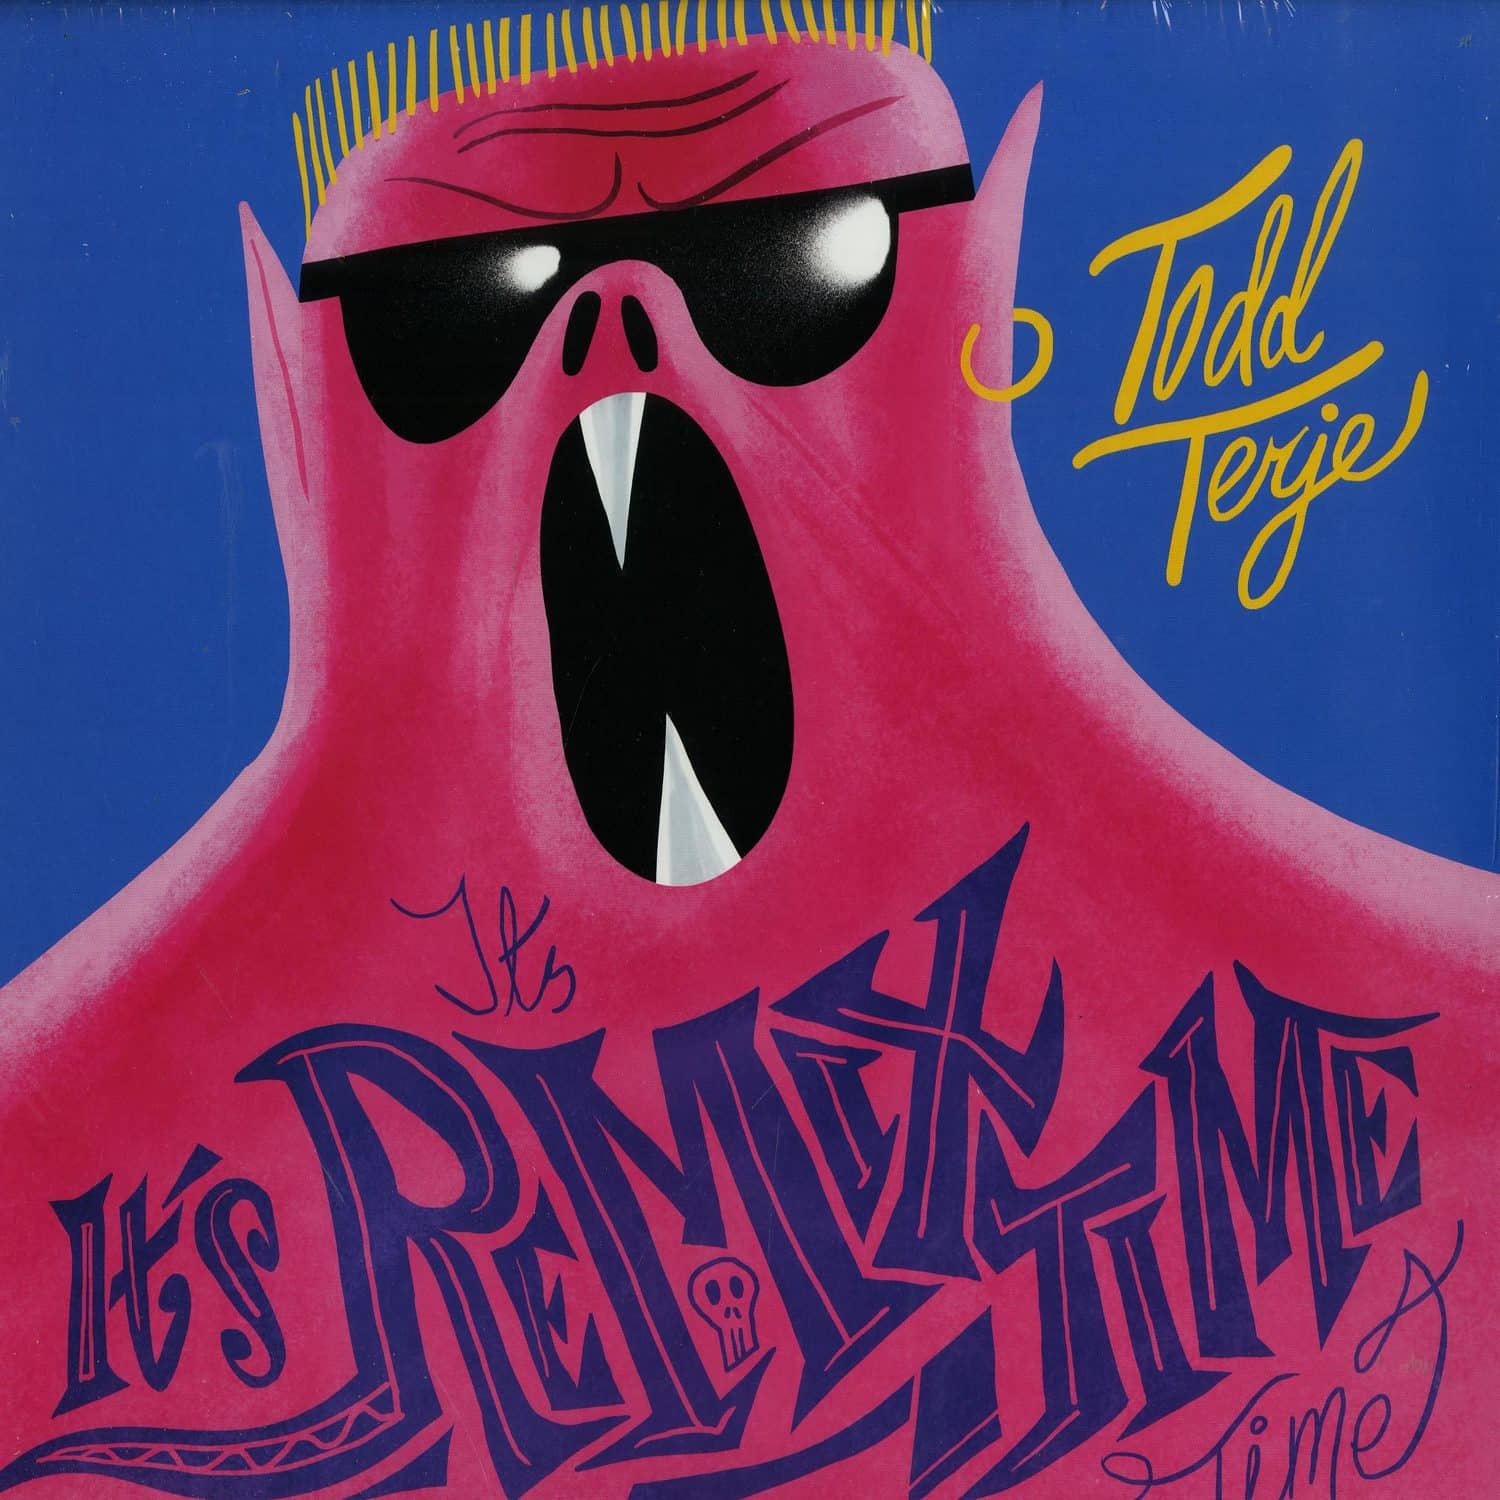 Todd Terje - ITS ITS REMIX TIME TIME